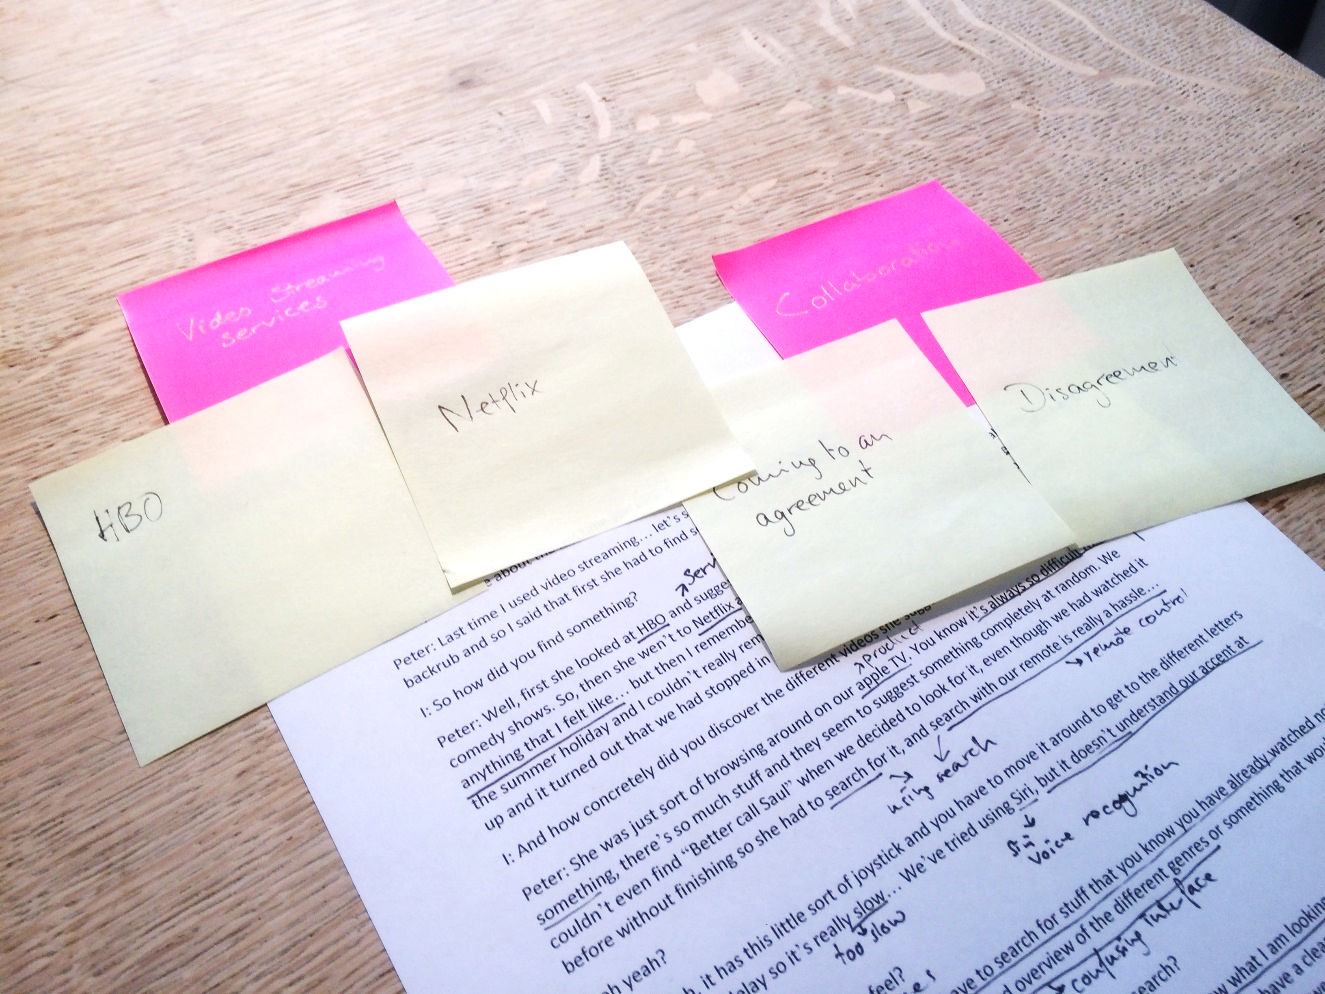 Sticky notes with themes identified from transcripts.